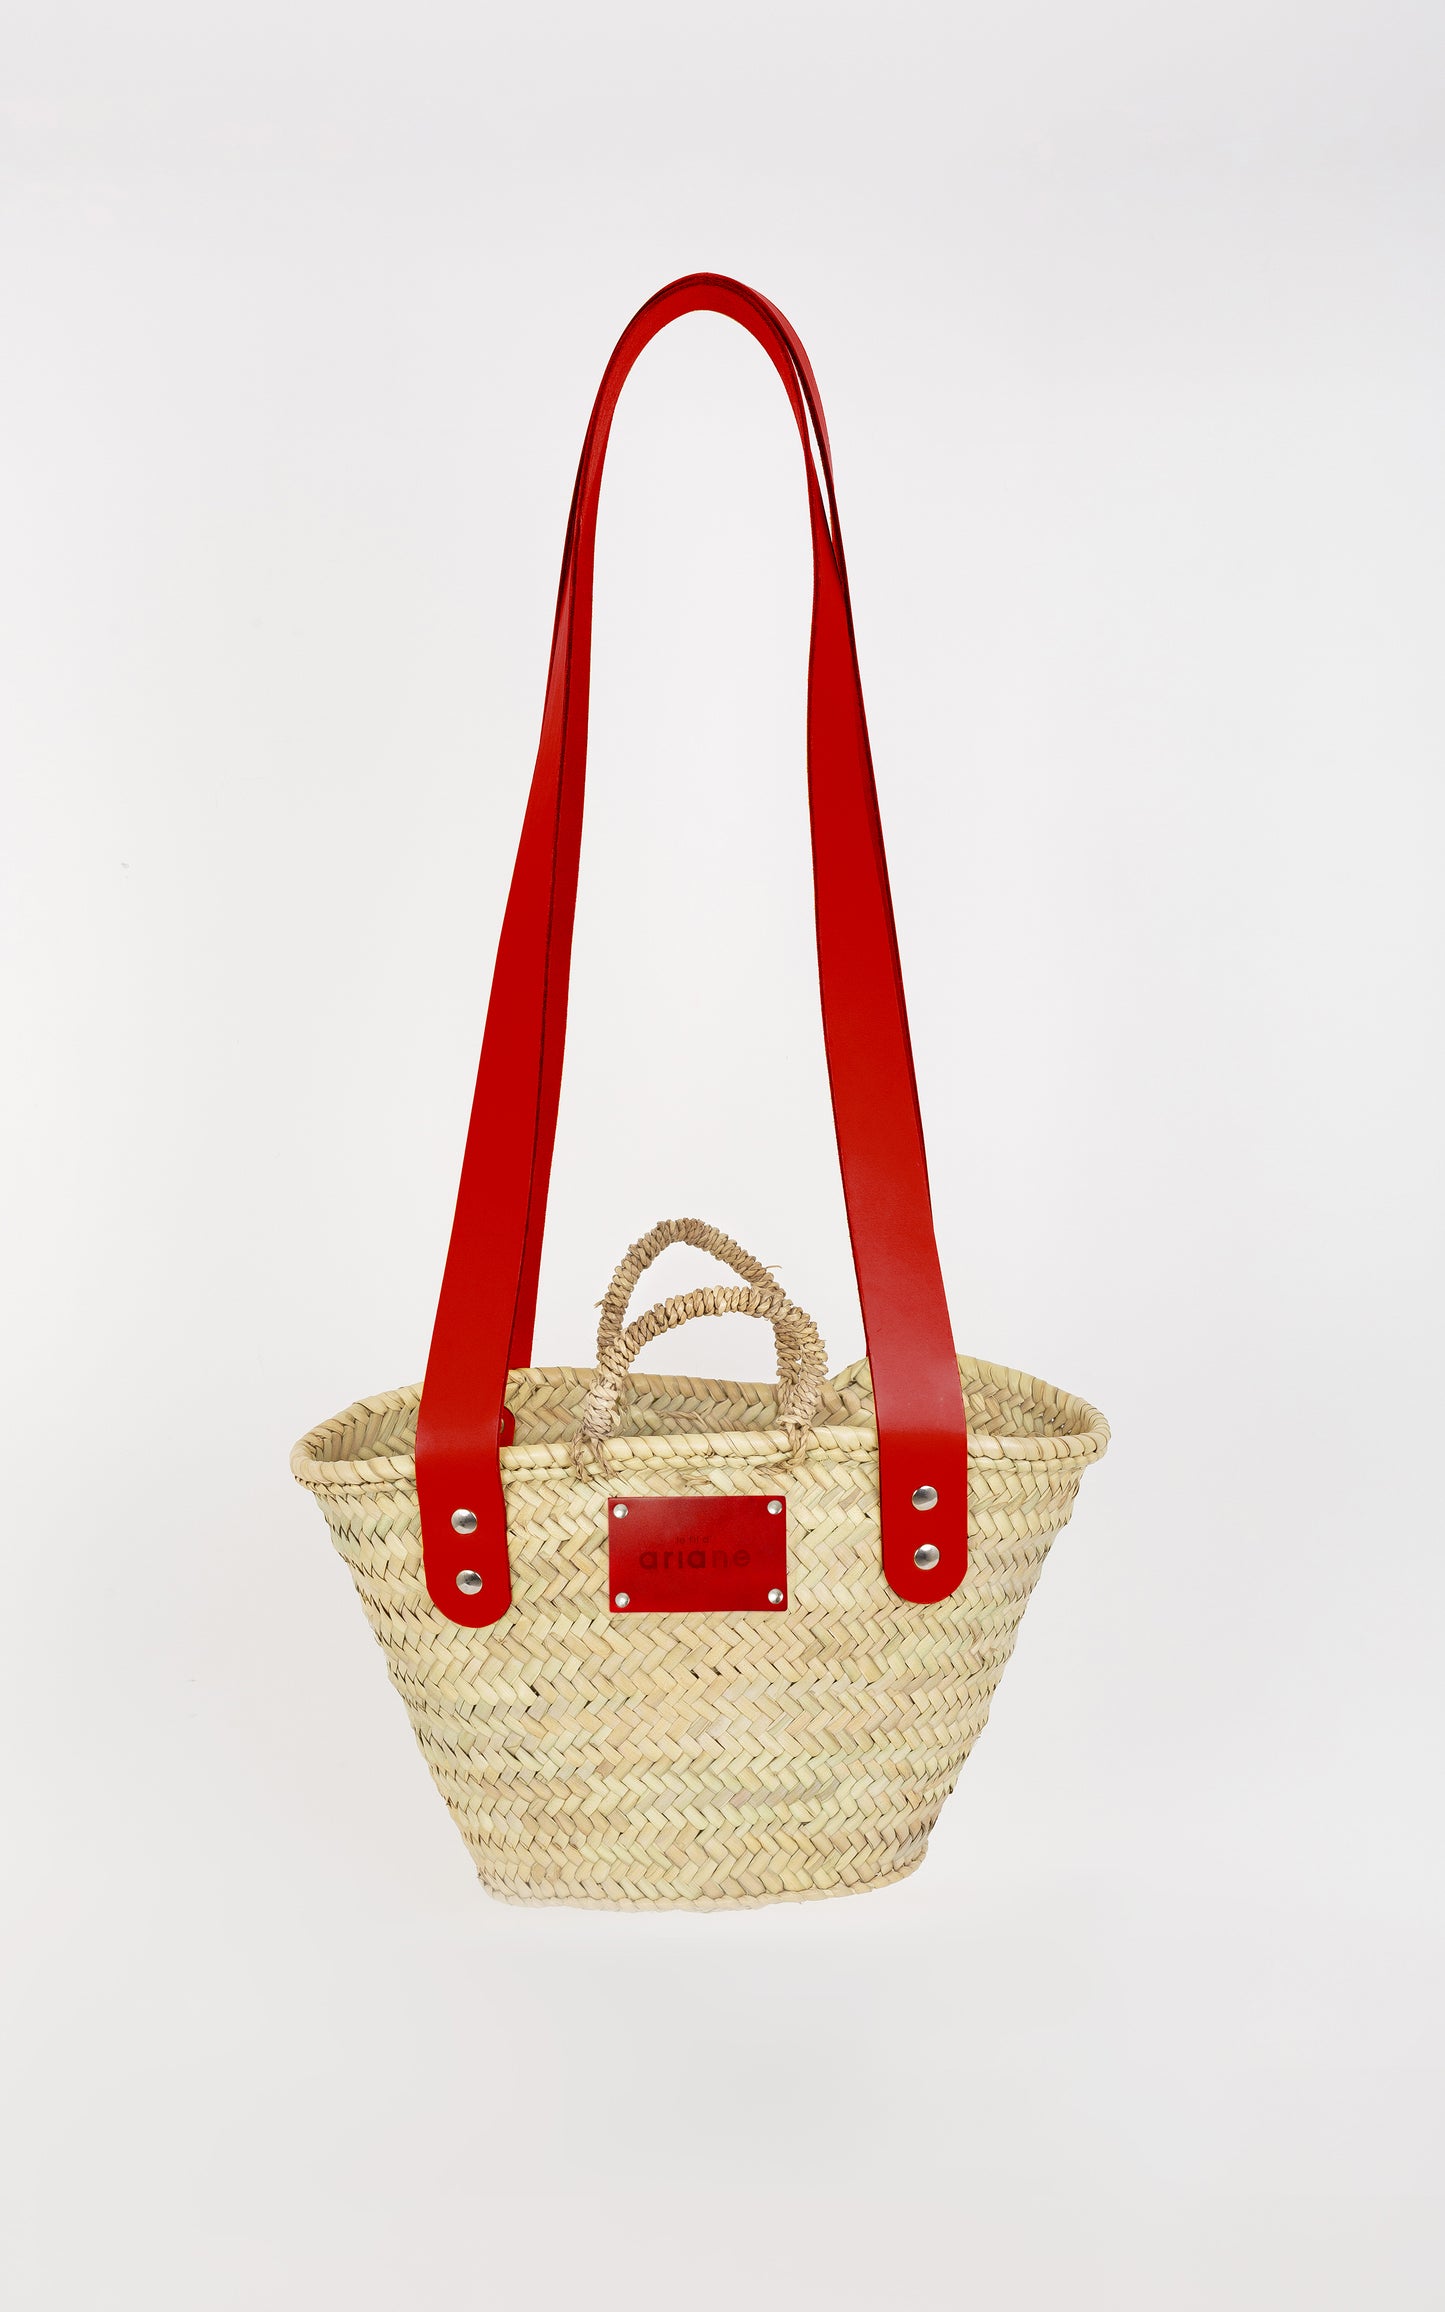 Panier THESEE - Taille S - Anses larges rouges